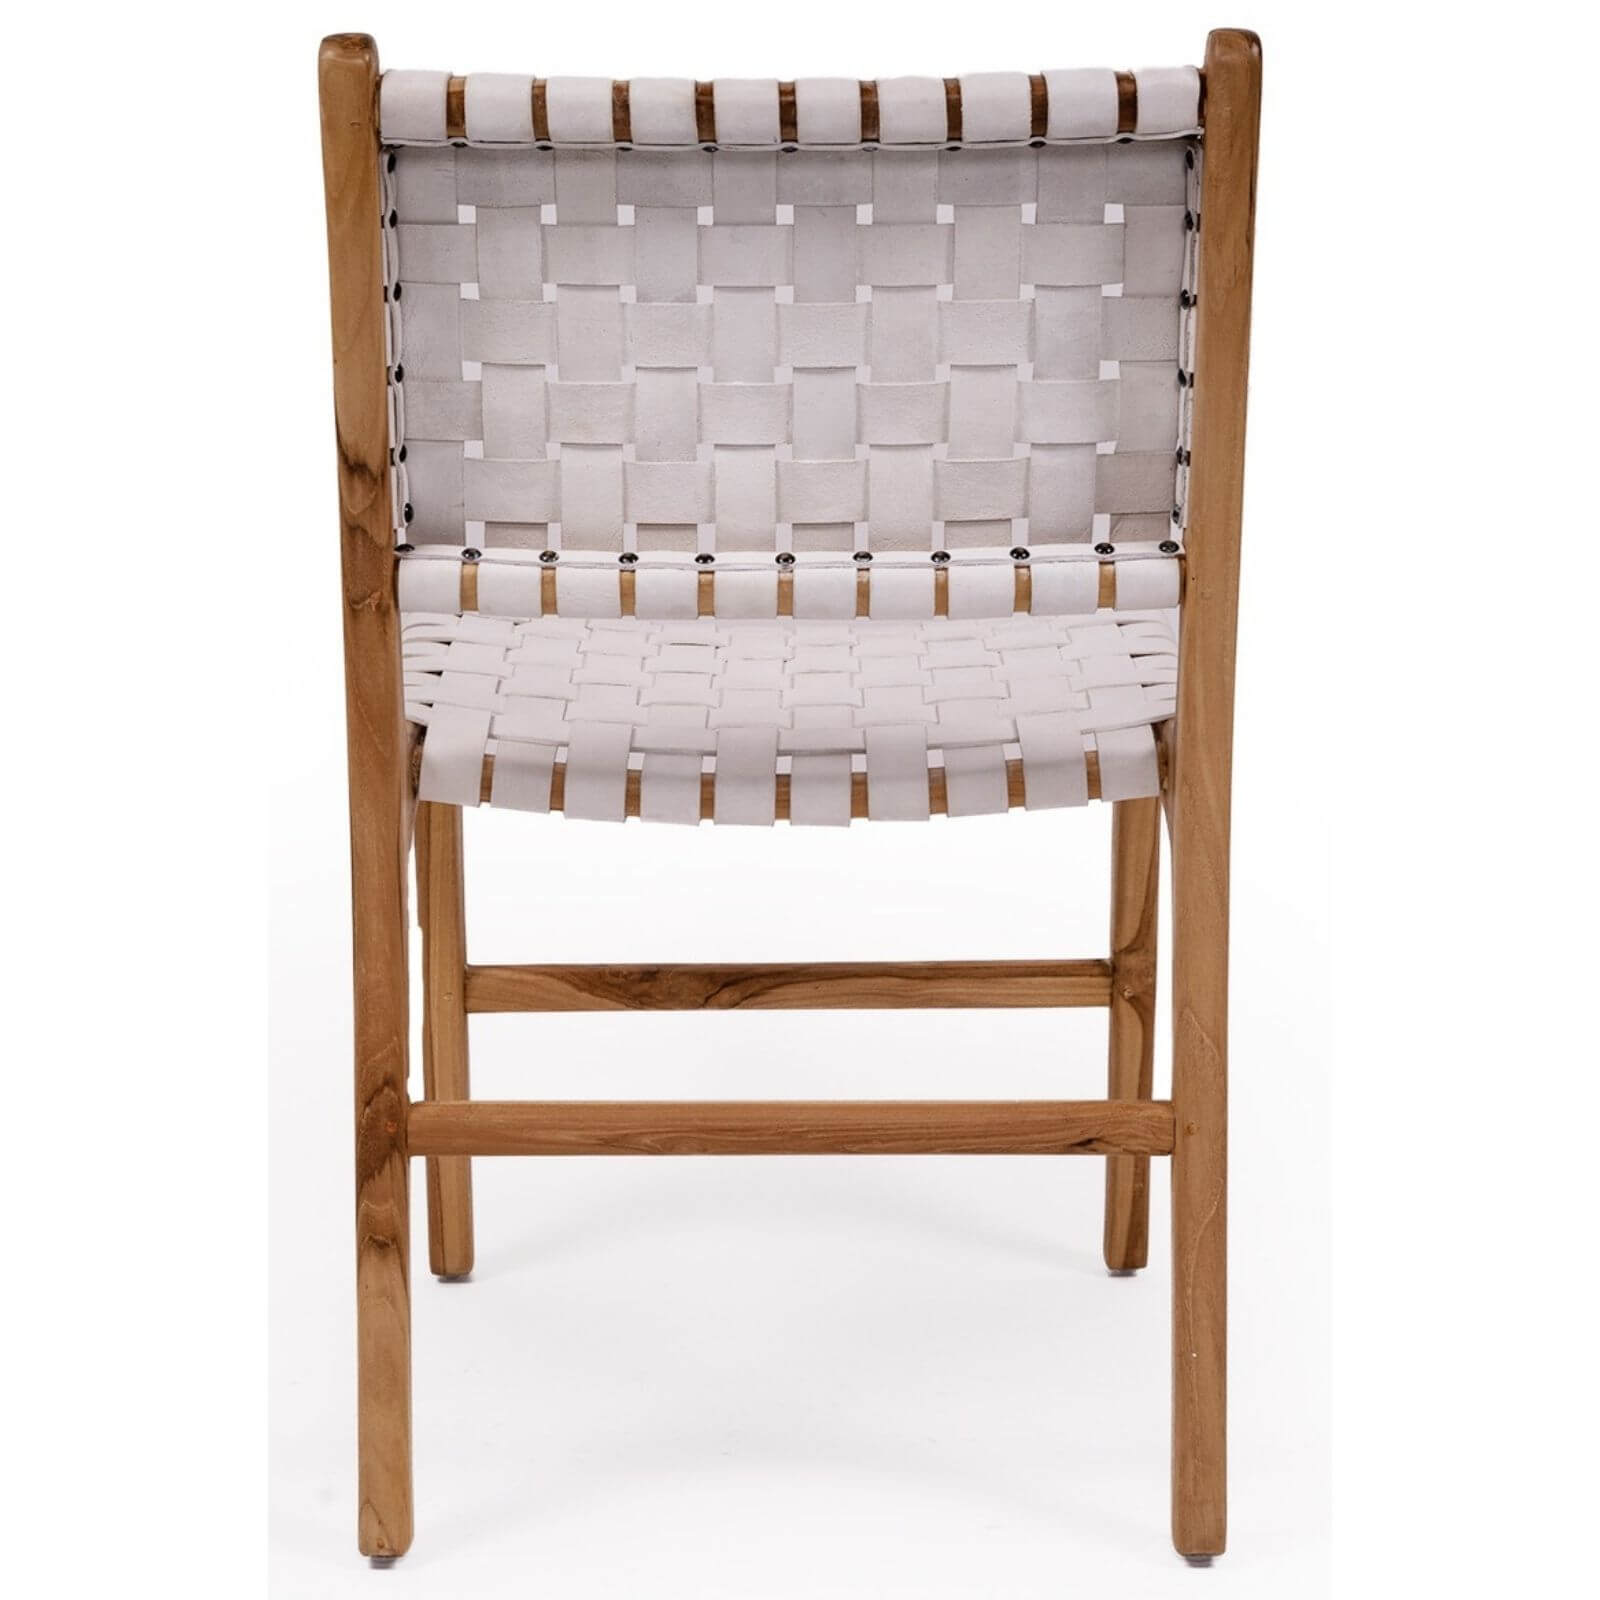 Lindeman Version 1 White, Tan, Natural, Black Coastal Leather Wooden Dining Chairs